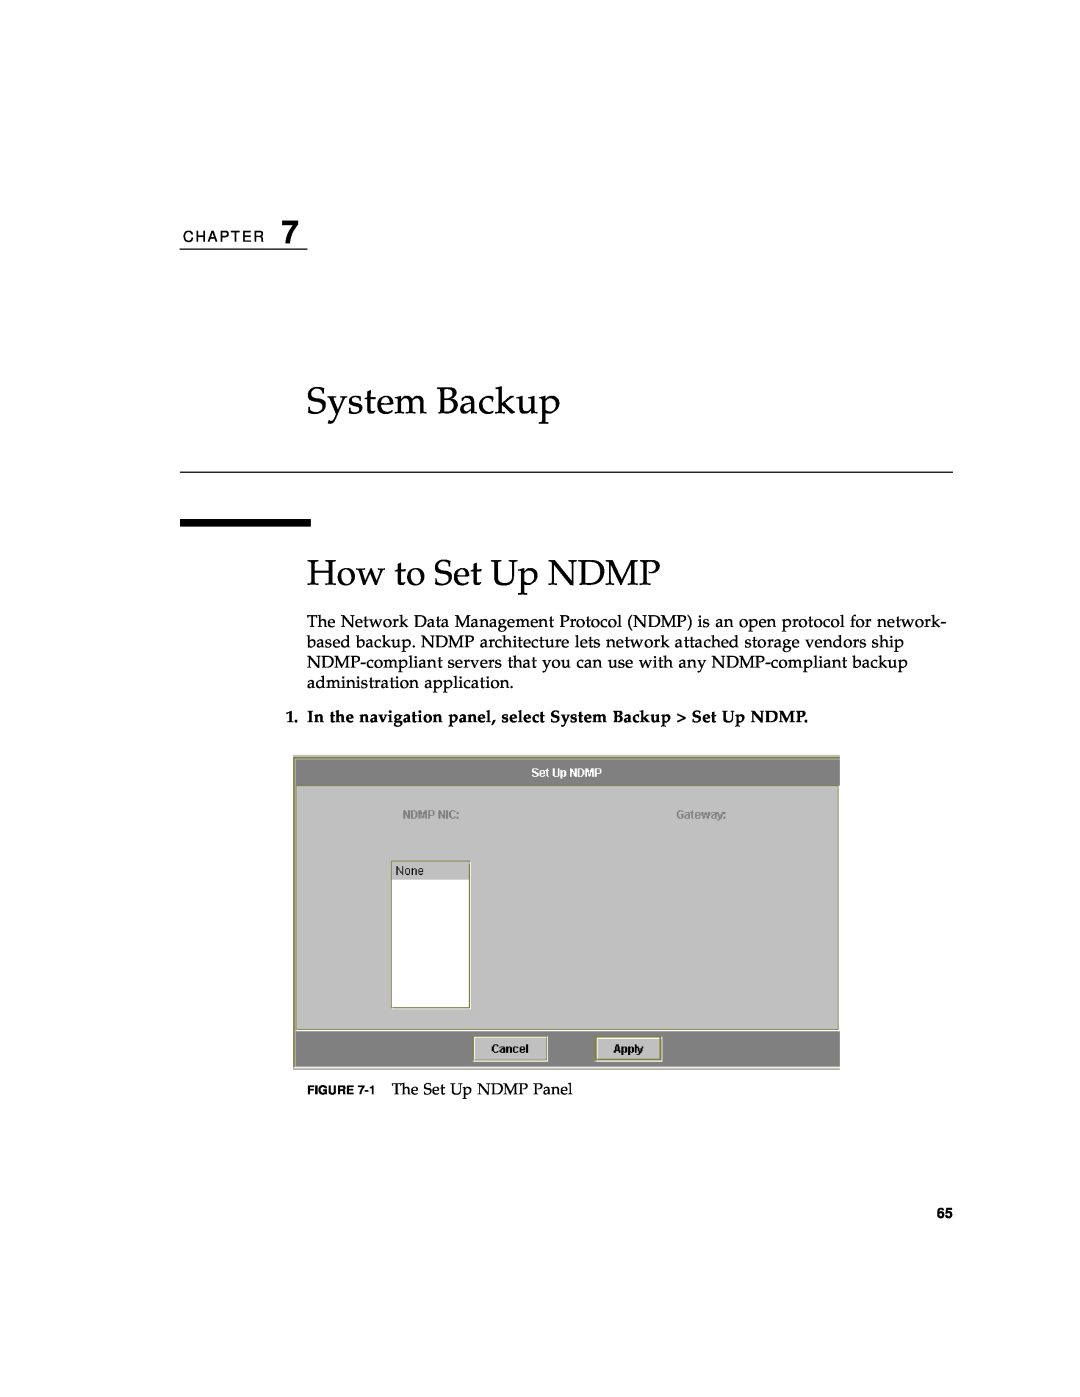 Sun Microsystems 5210 NAS manual System Backup, How to Set Up NDMP 